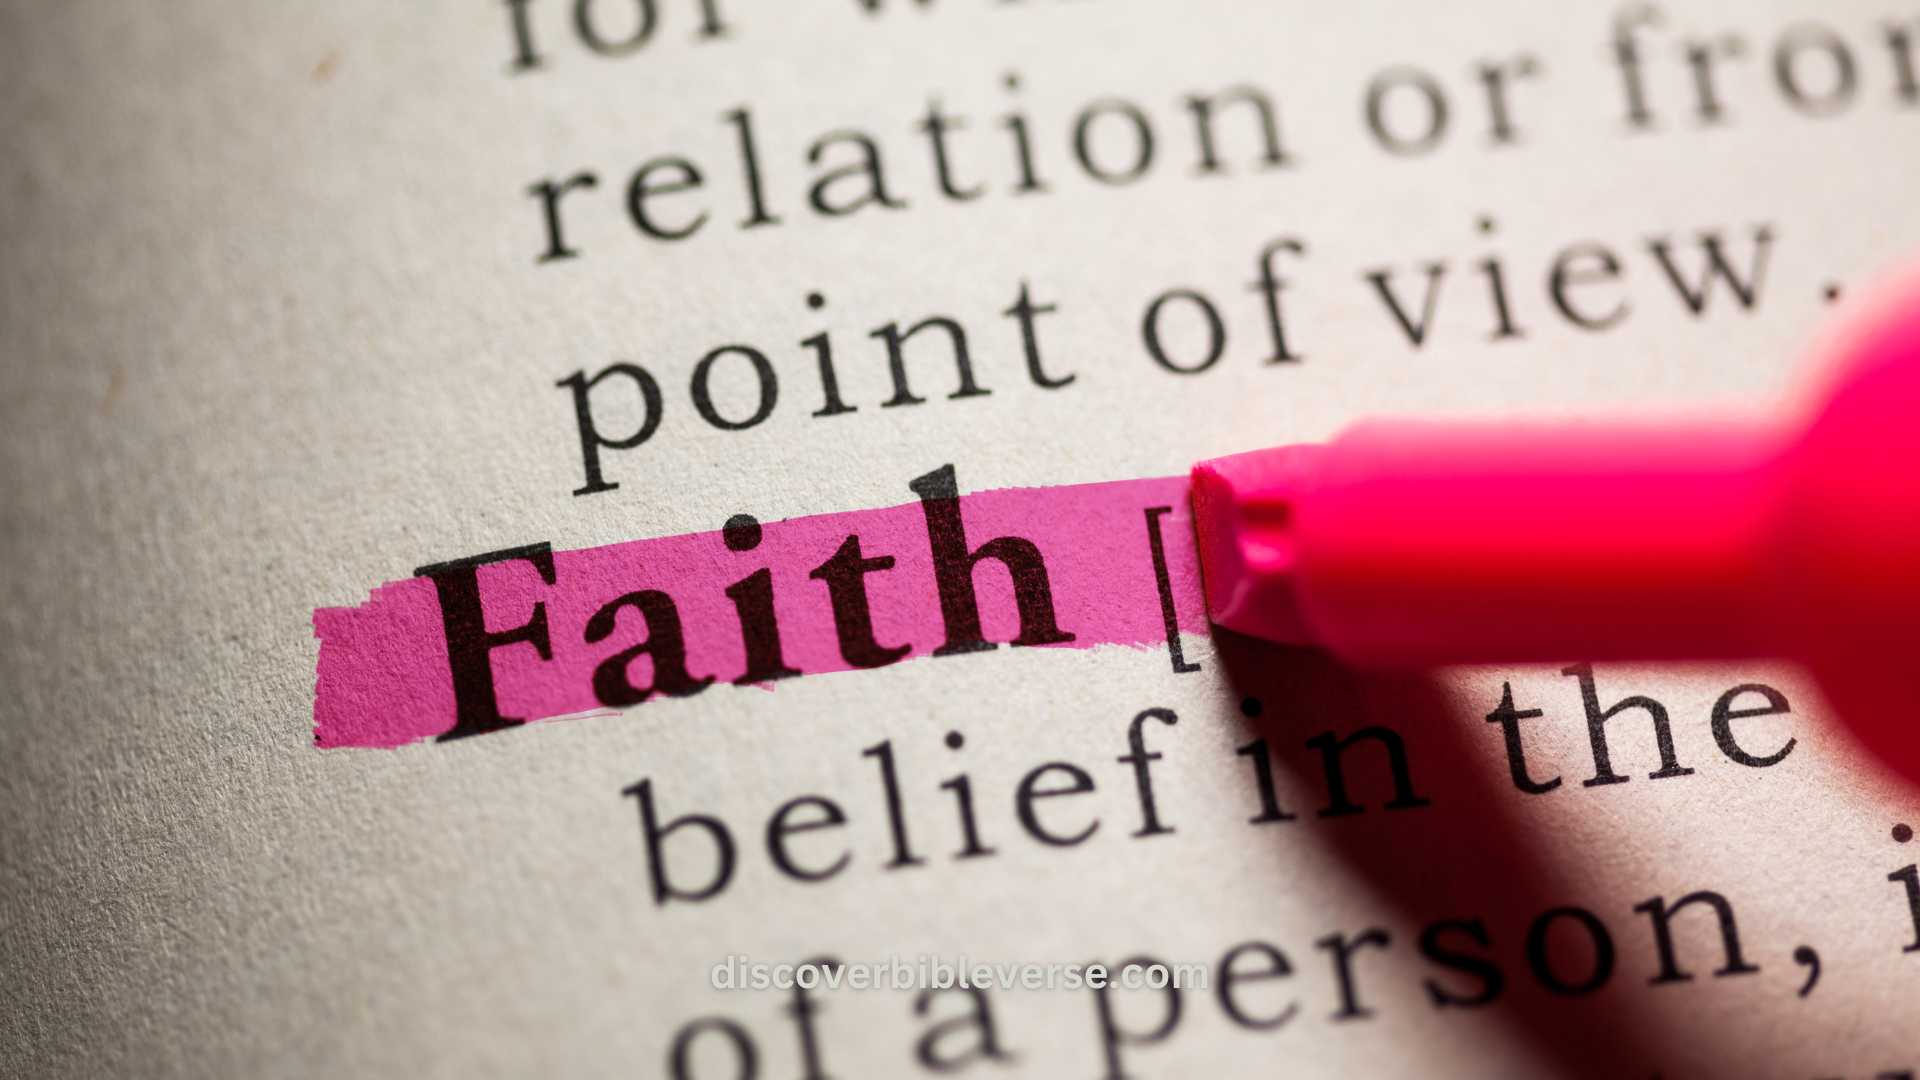 How Many Times is Faith Mentioned in the Bible?